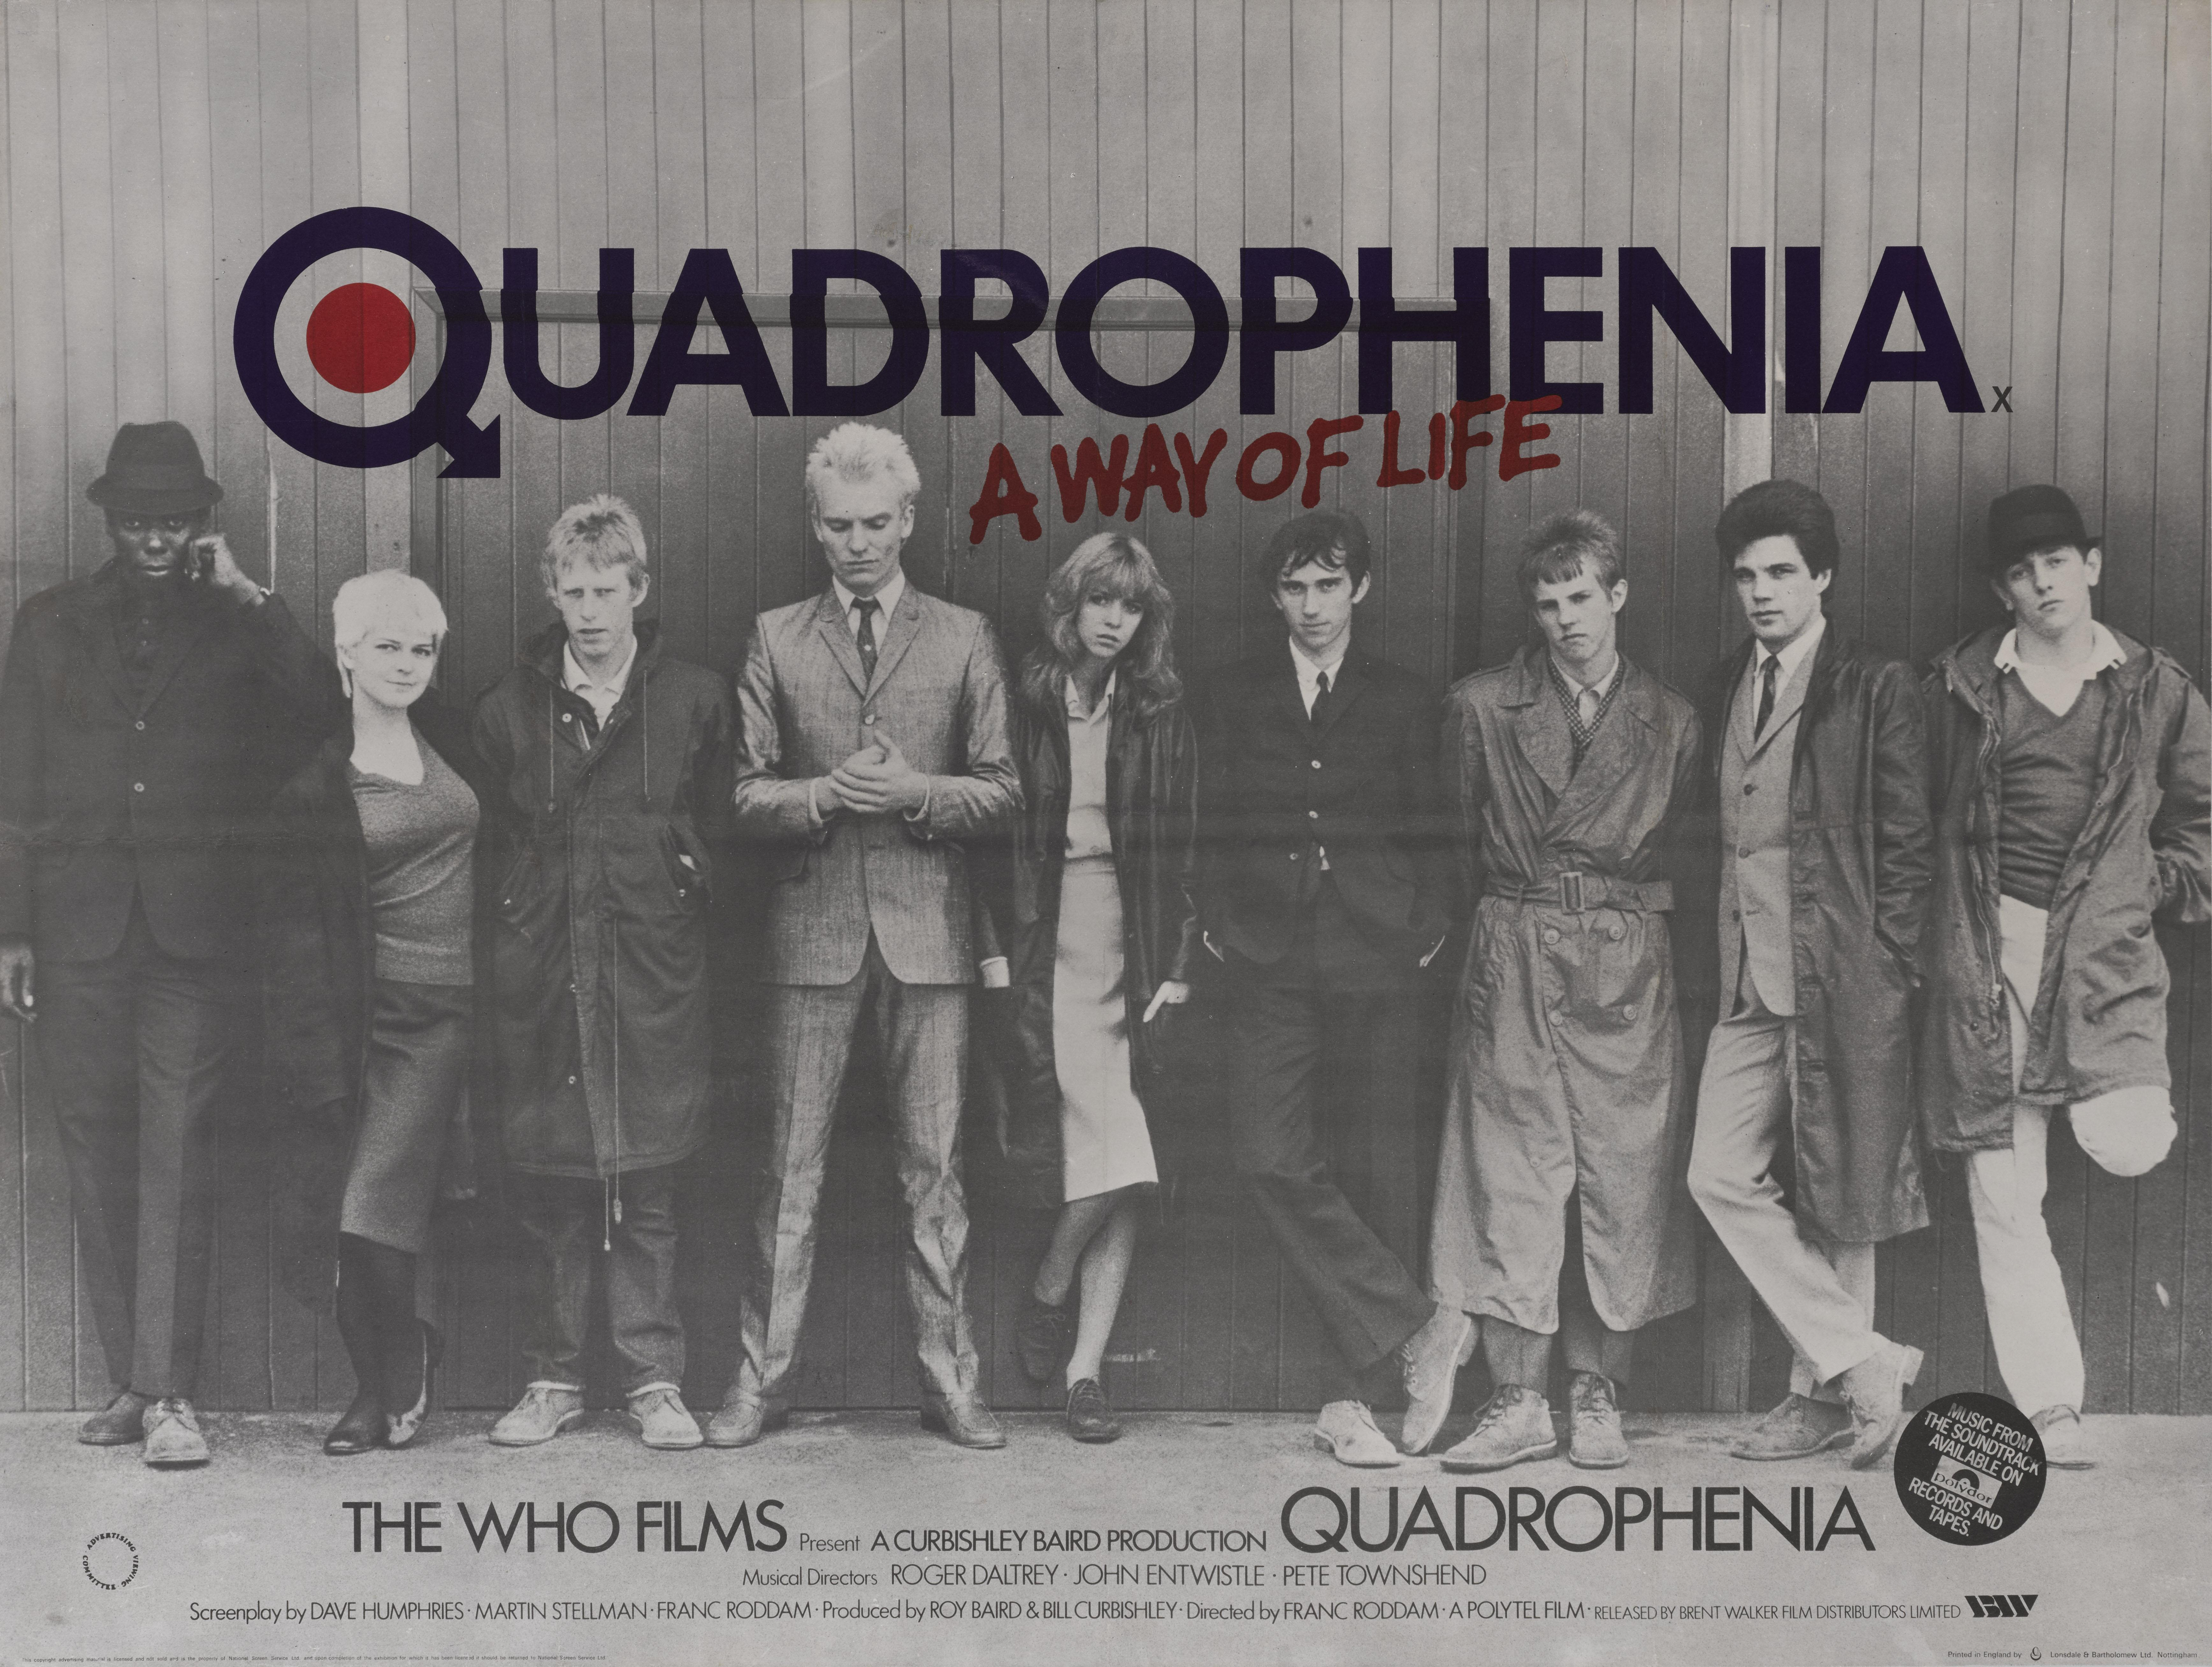 Original British film poster for the 1979 film Quadrophenia.
This film was Franc Roddam's feature film Directional debut. It is set in 1964 and follows Jimmy (Phil Daniels), a mod from London, who breaks free from his boring life and annoying